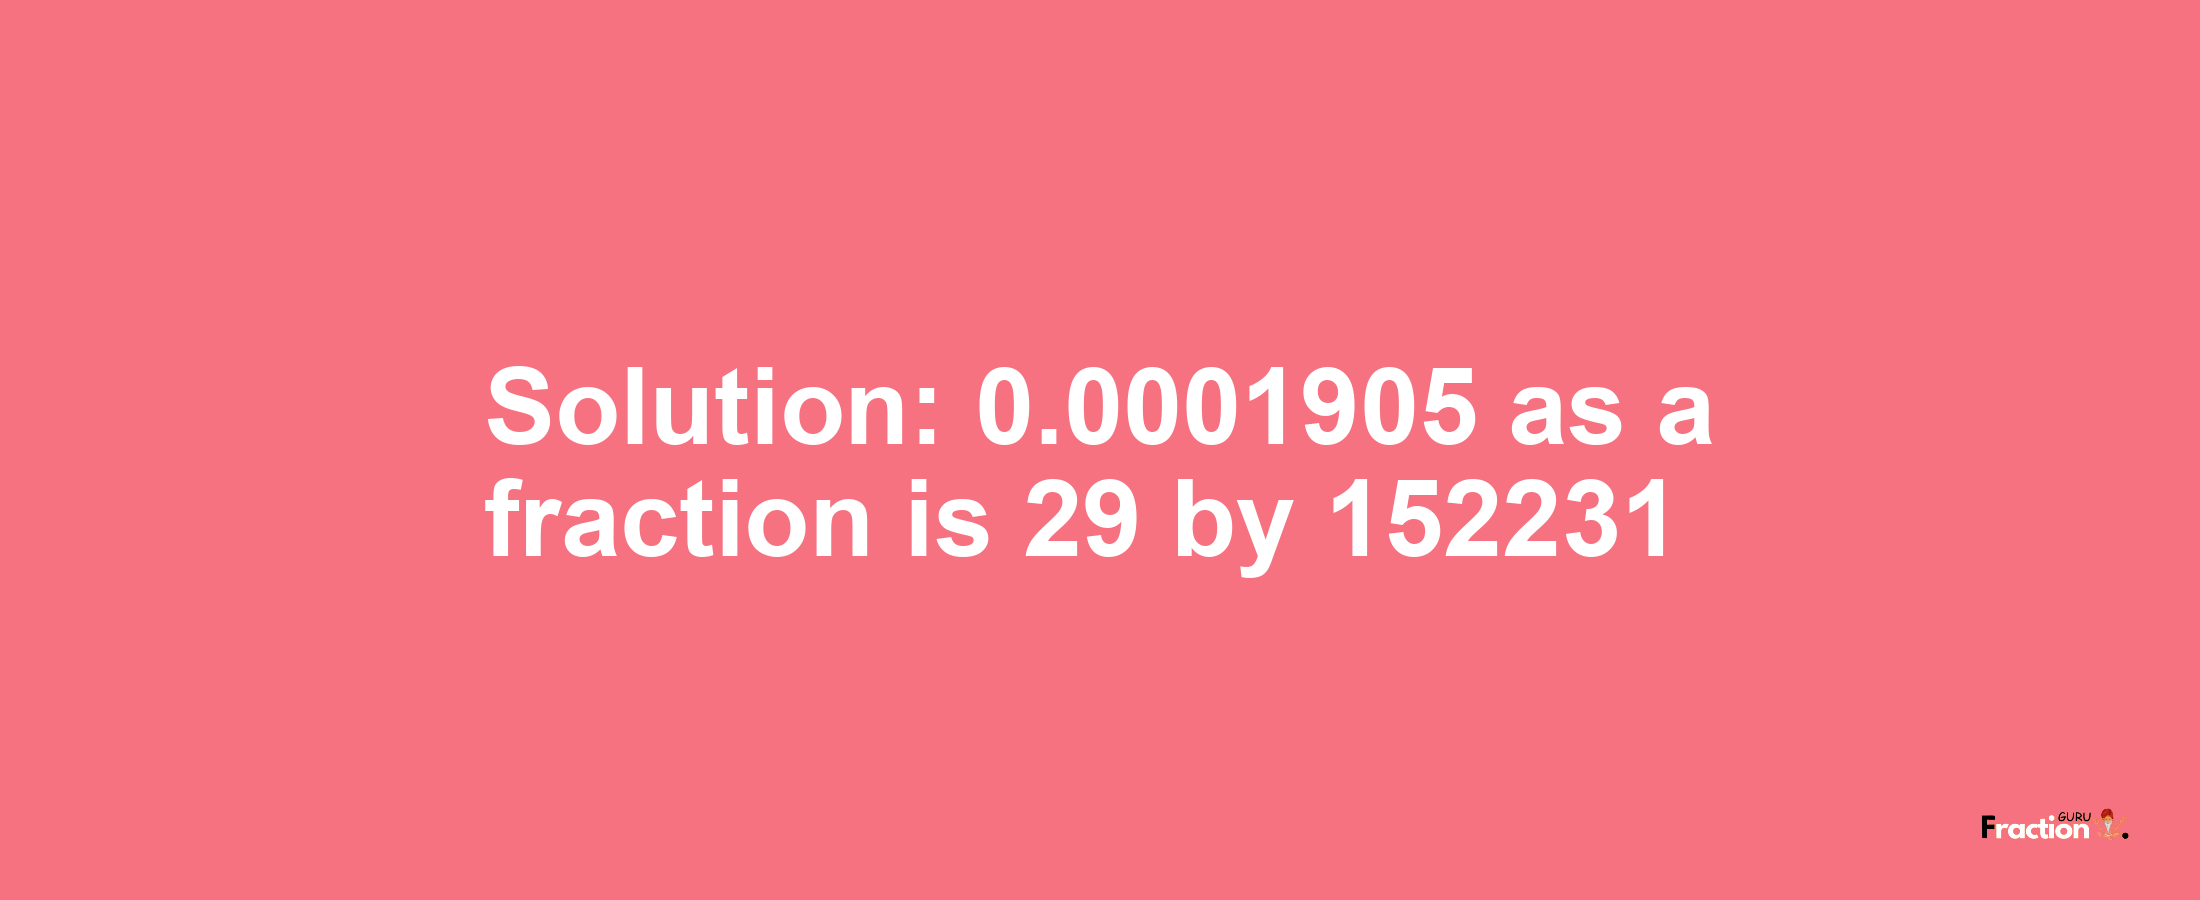 Solution:0.0001905 as a fraction is 29/152231